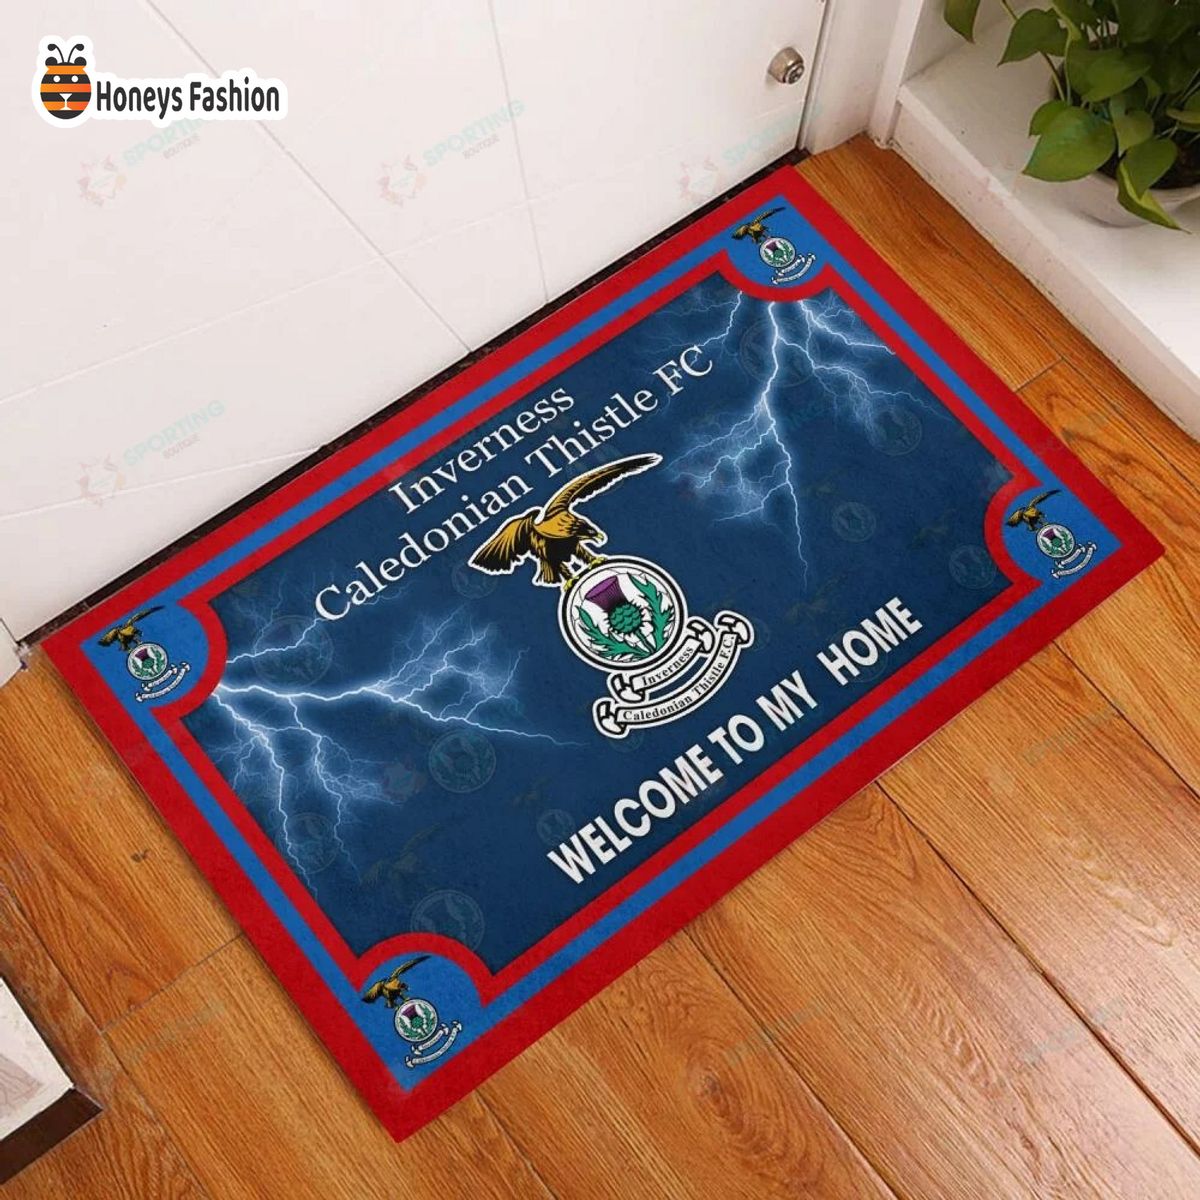 Inverness Caledonian Thistle F.C. welcome to my home doormat